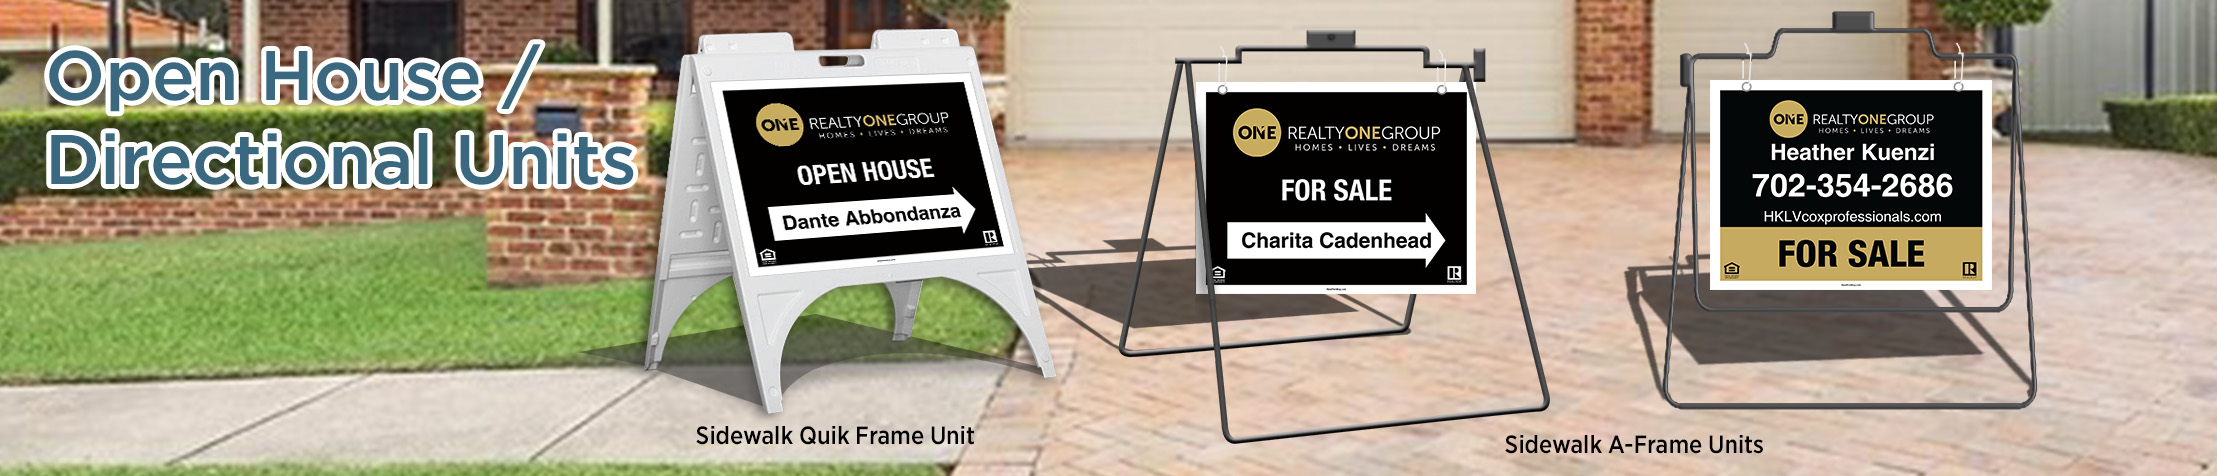 Realty ONE Group Real Estate Open House/Directional Units - real estate Sidewalk A-Frame signs | BestPrintBuy.com